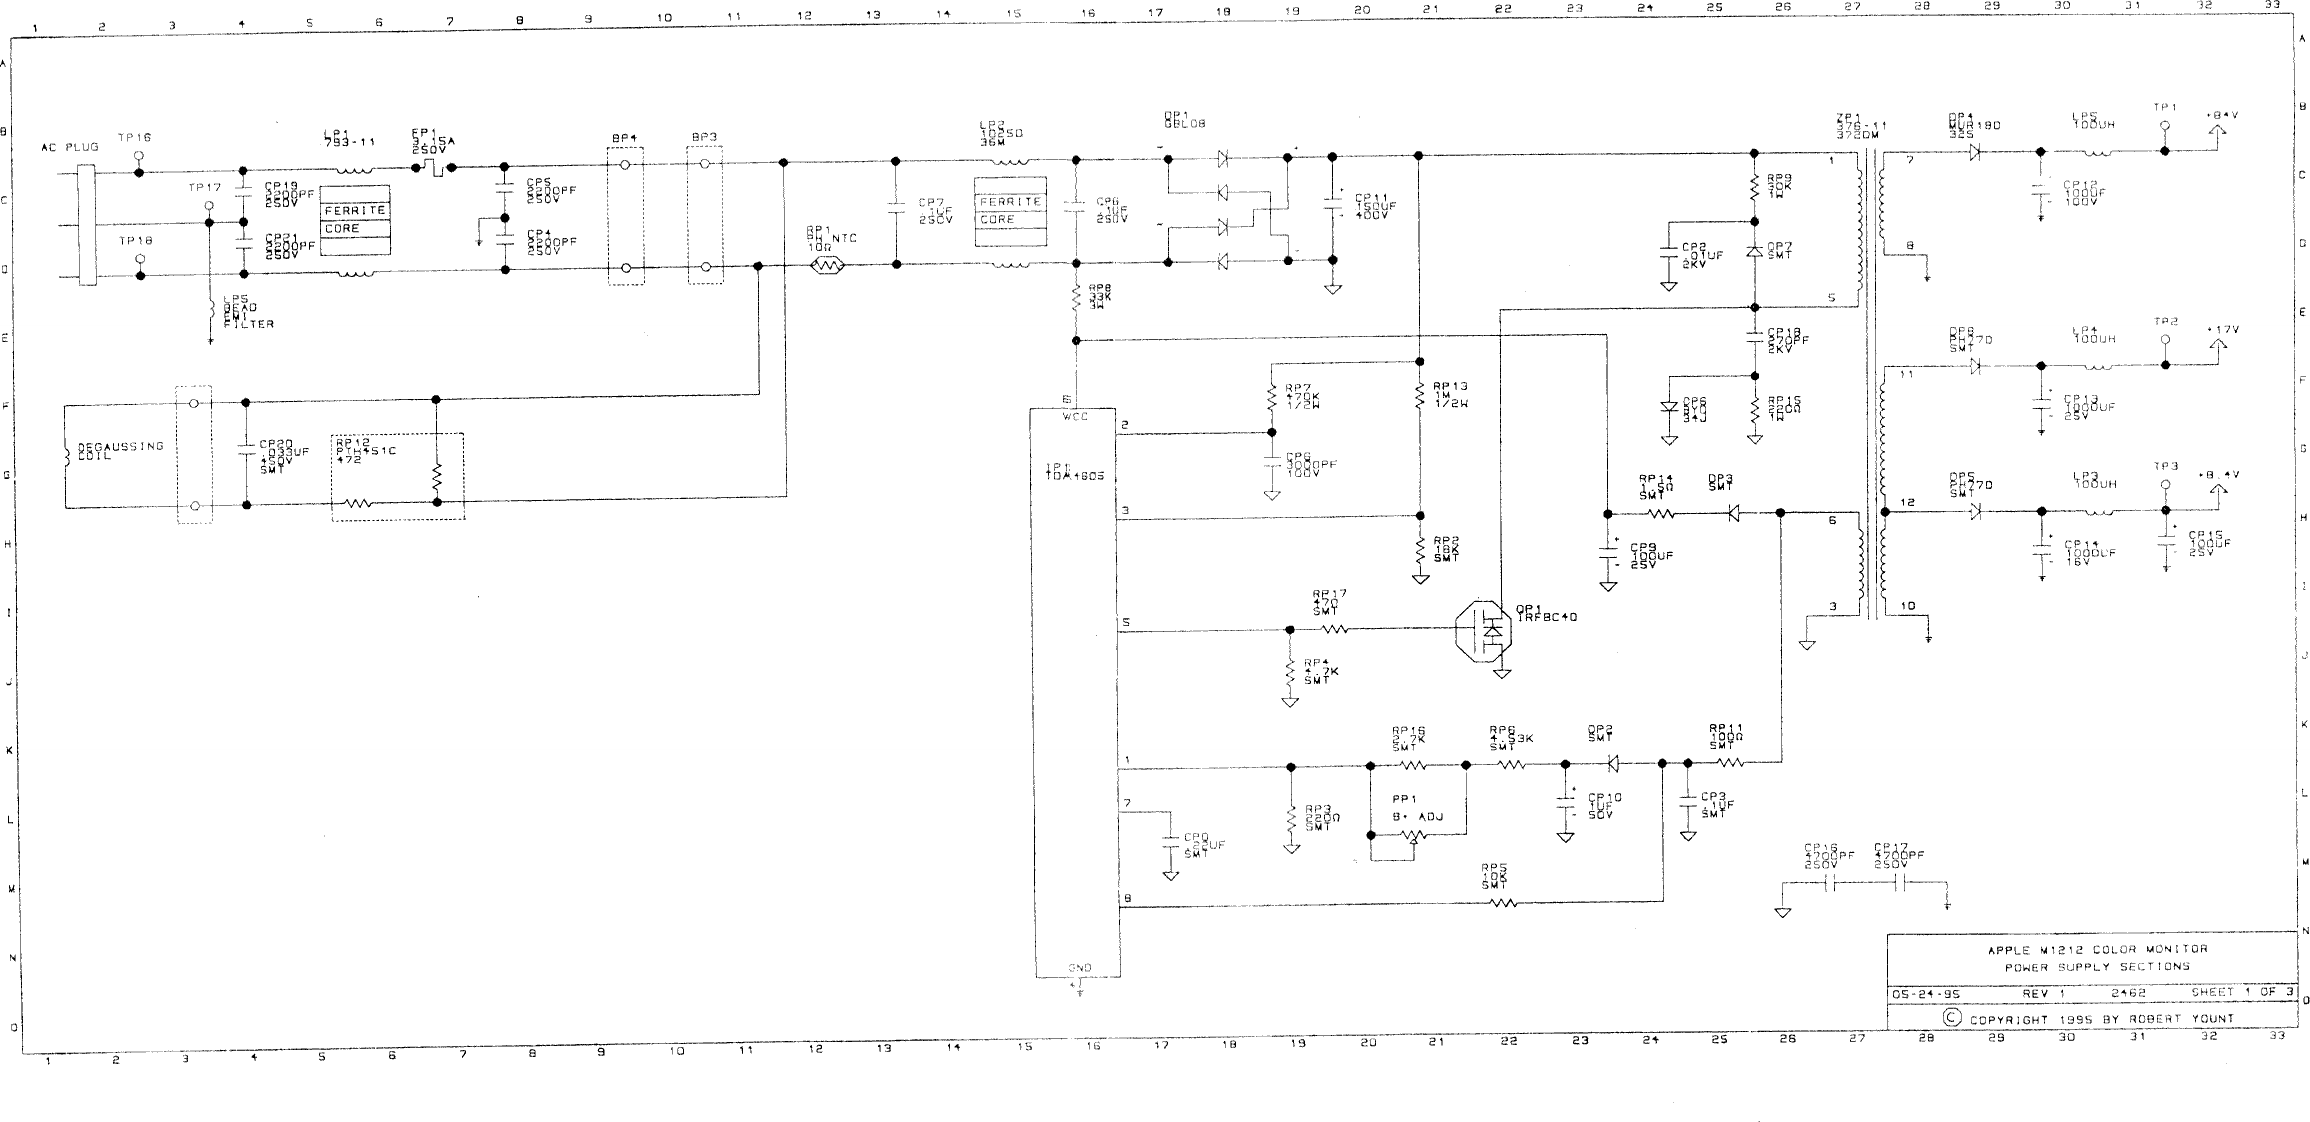 Page 1 of 3 - Apple M1212 Monitor Schematic